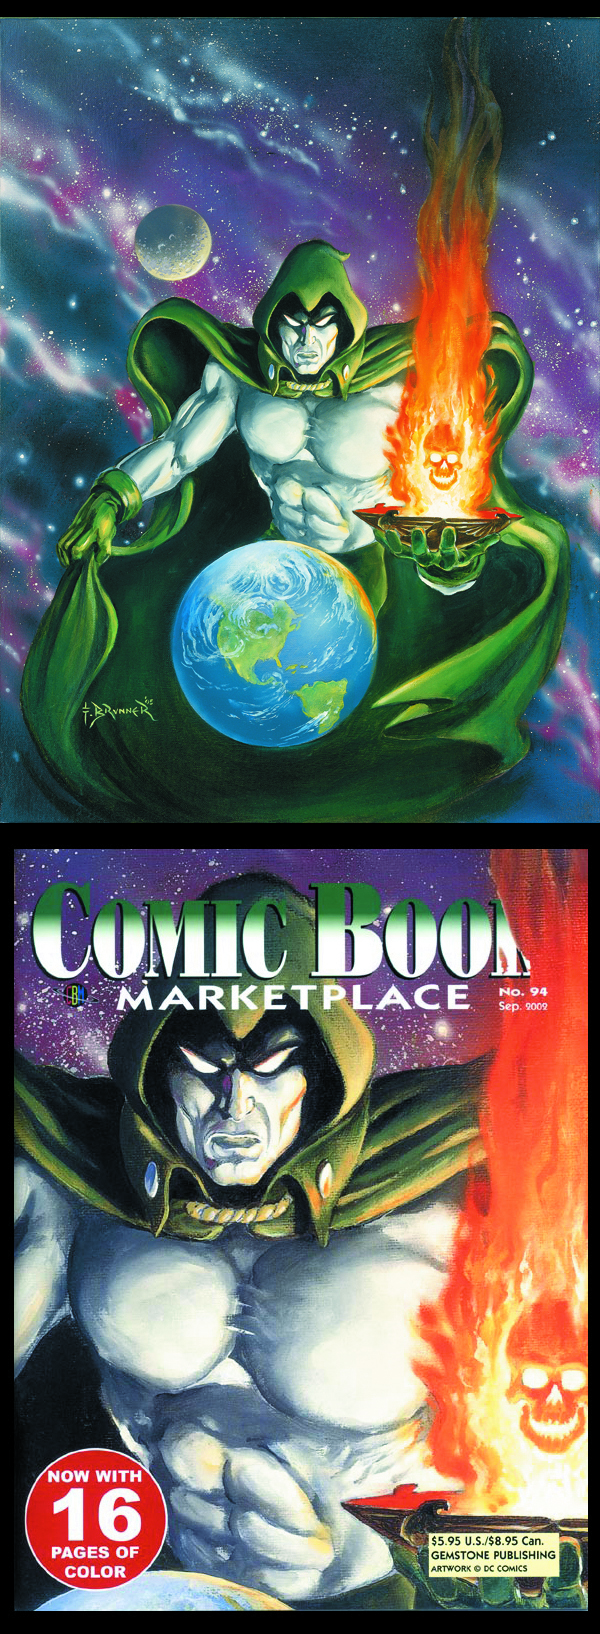 Image: Comic Book Marketplace #94 Spectre cover by Frank Brunner